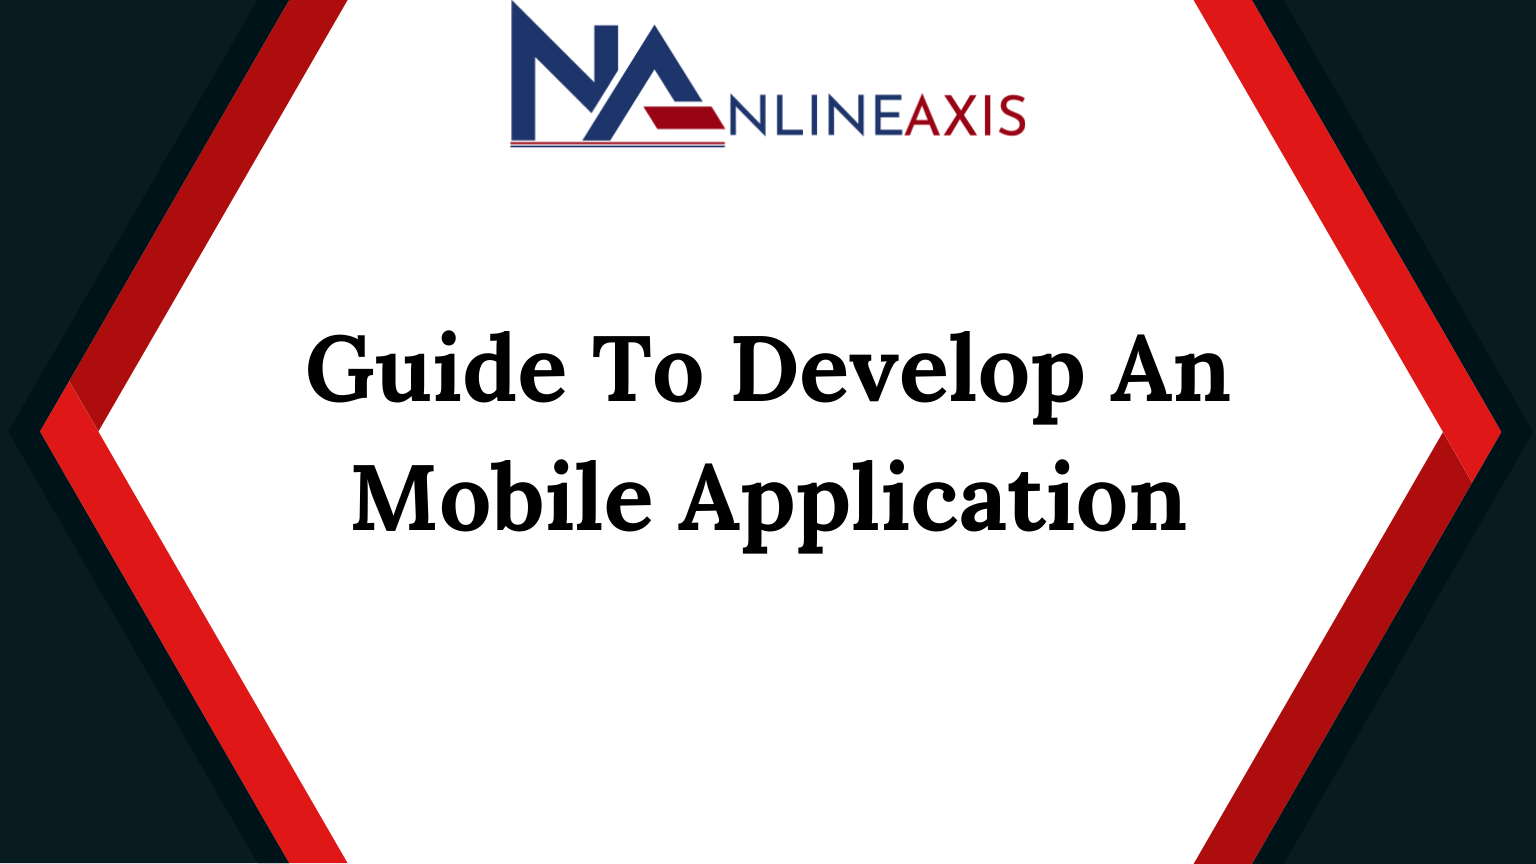 Guide To Develop An Mobile Application